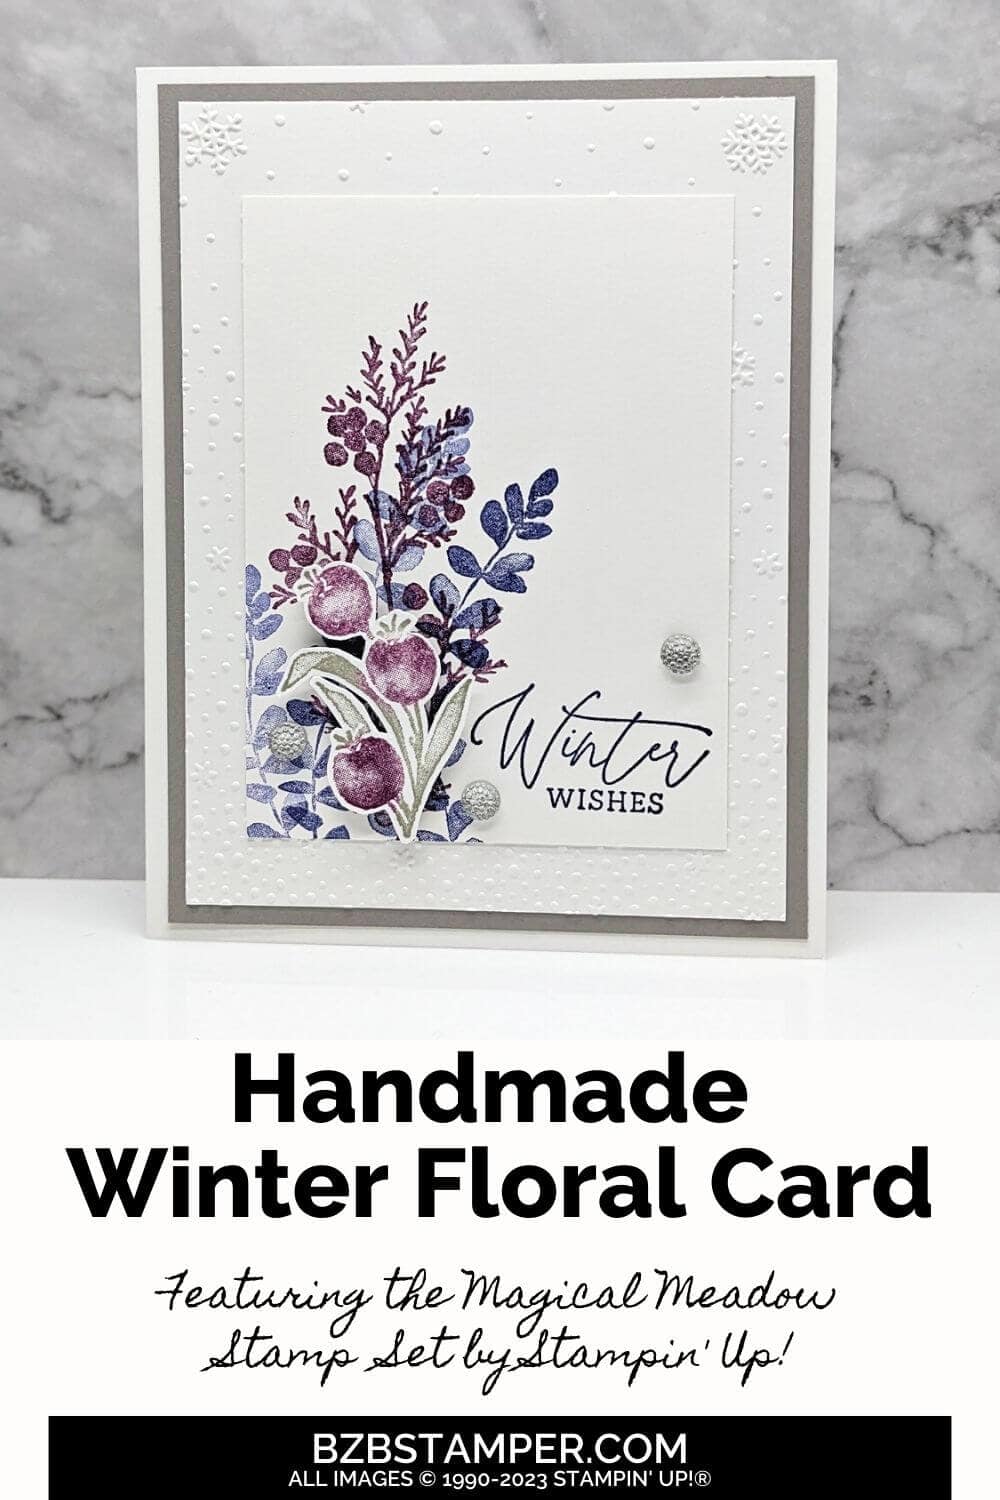 Magical Meadow Stamp Set by Stampin' Up! featuring various foliage in navy blue, purples and gray.  SEntiment is Winter Wishes and has an embossed snowflake background.
